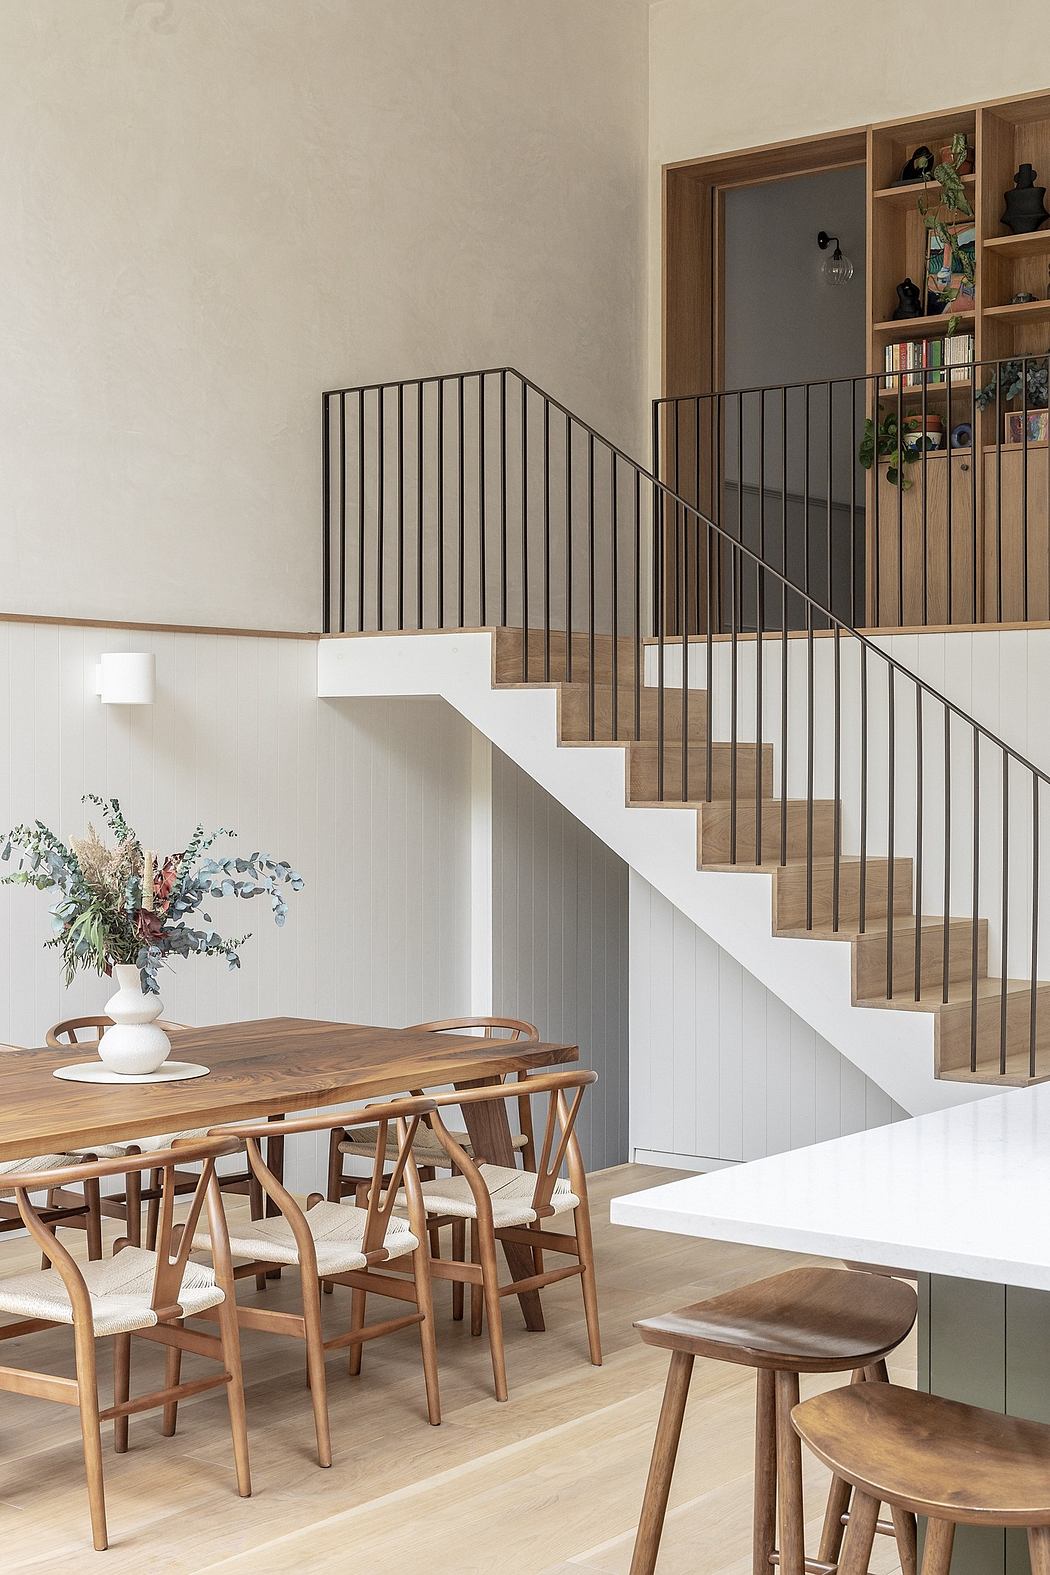 Modern dining room with wooden staircase and minimalist furniture.